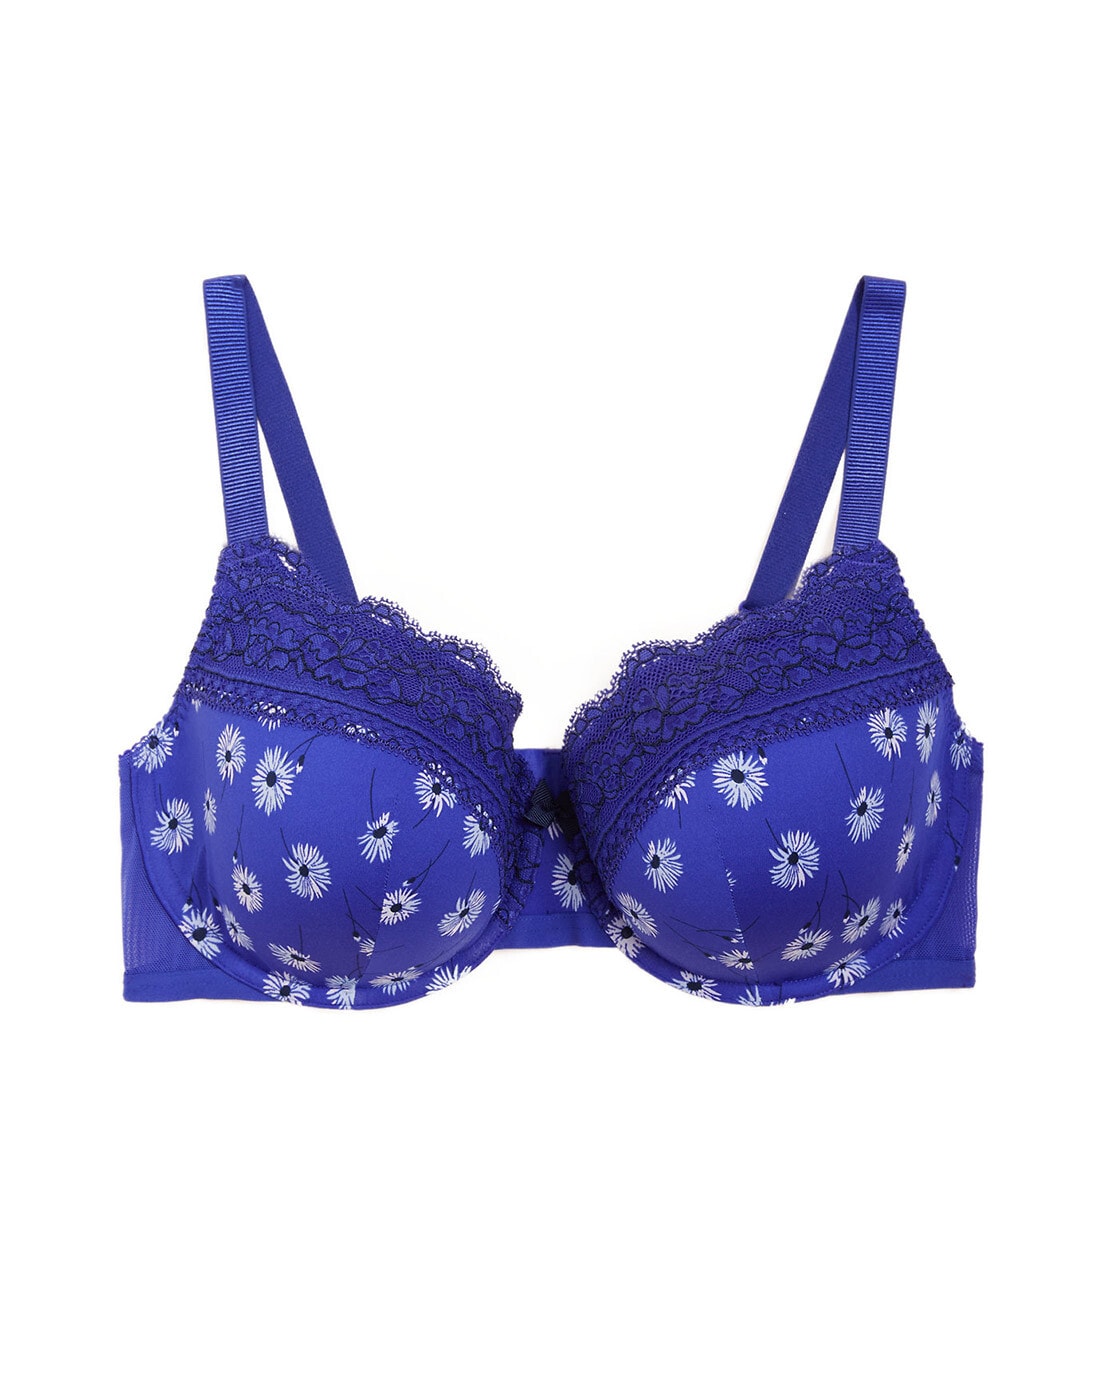 Marks & Spencers Bra Size 32 E New Tags Wired Blue Full Cup Colbat Blue